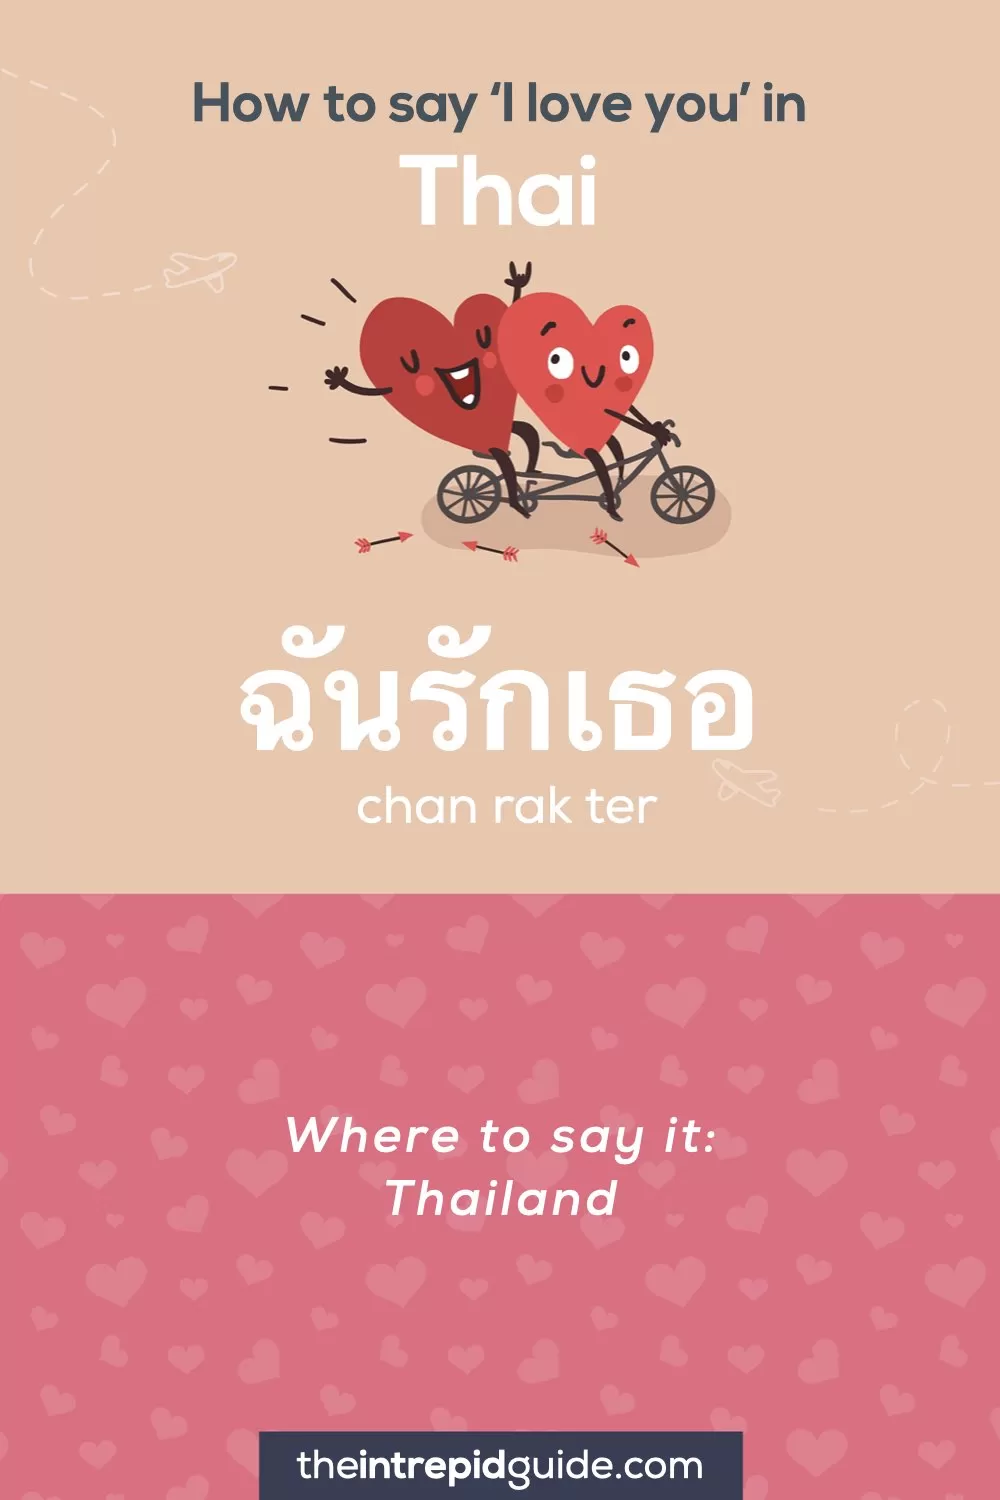 How to say I love you in different languages - Thai - ฉันรักเธอ